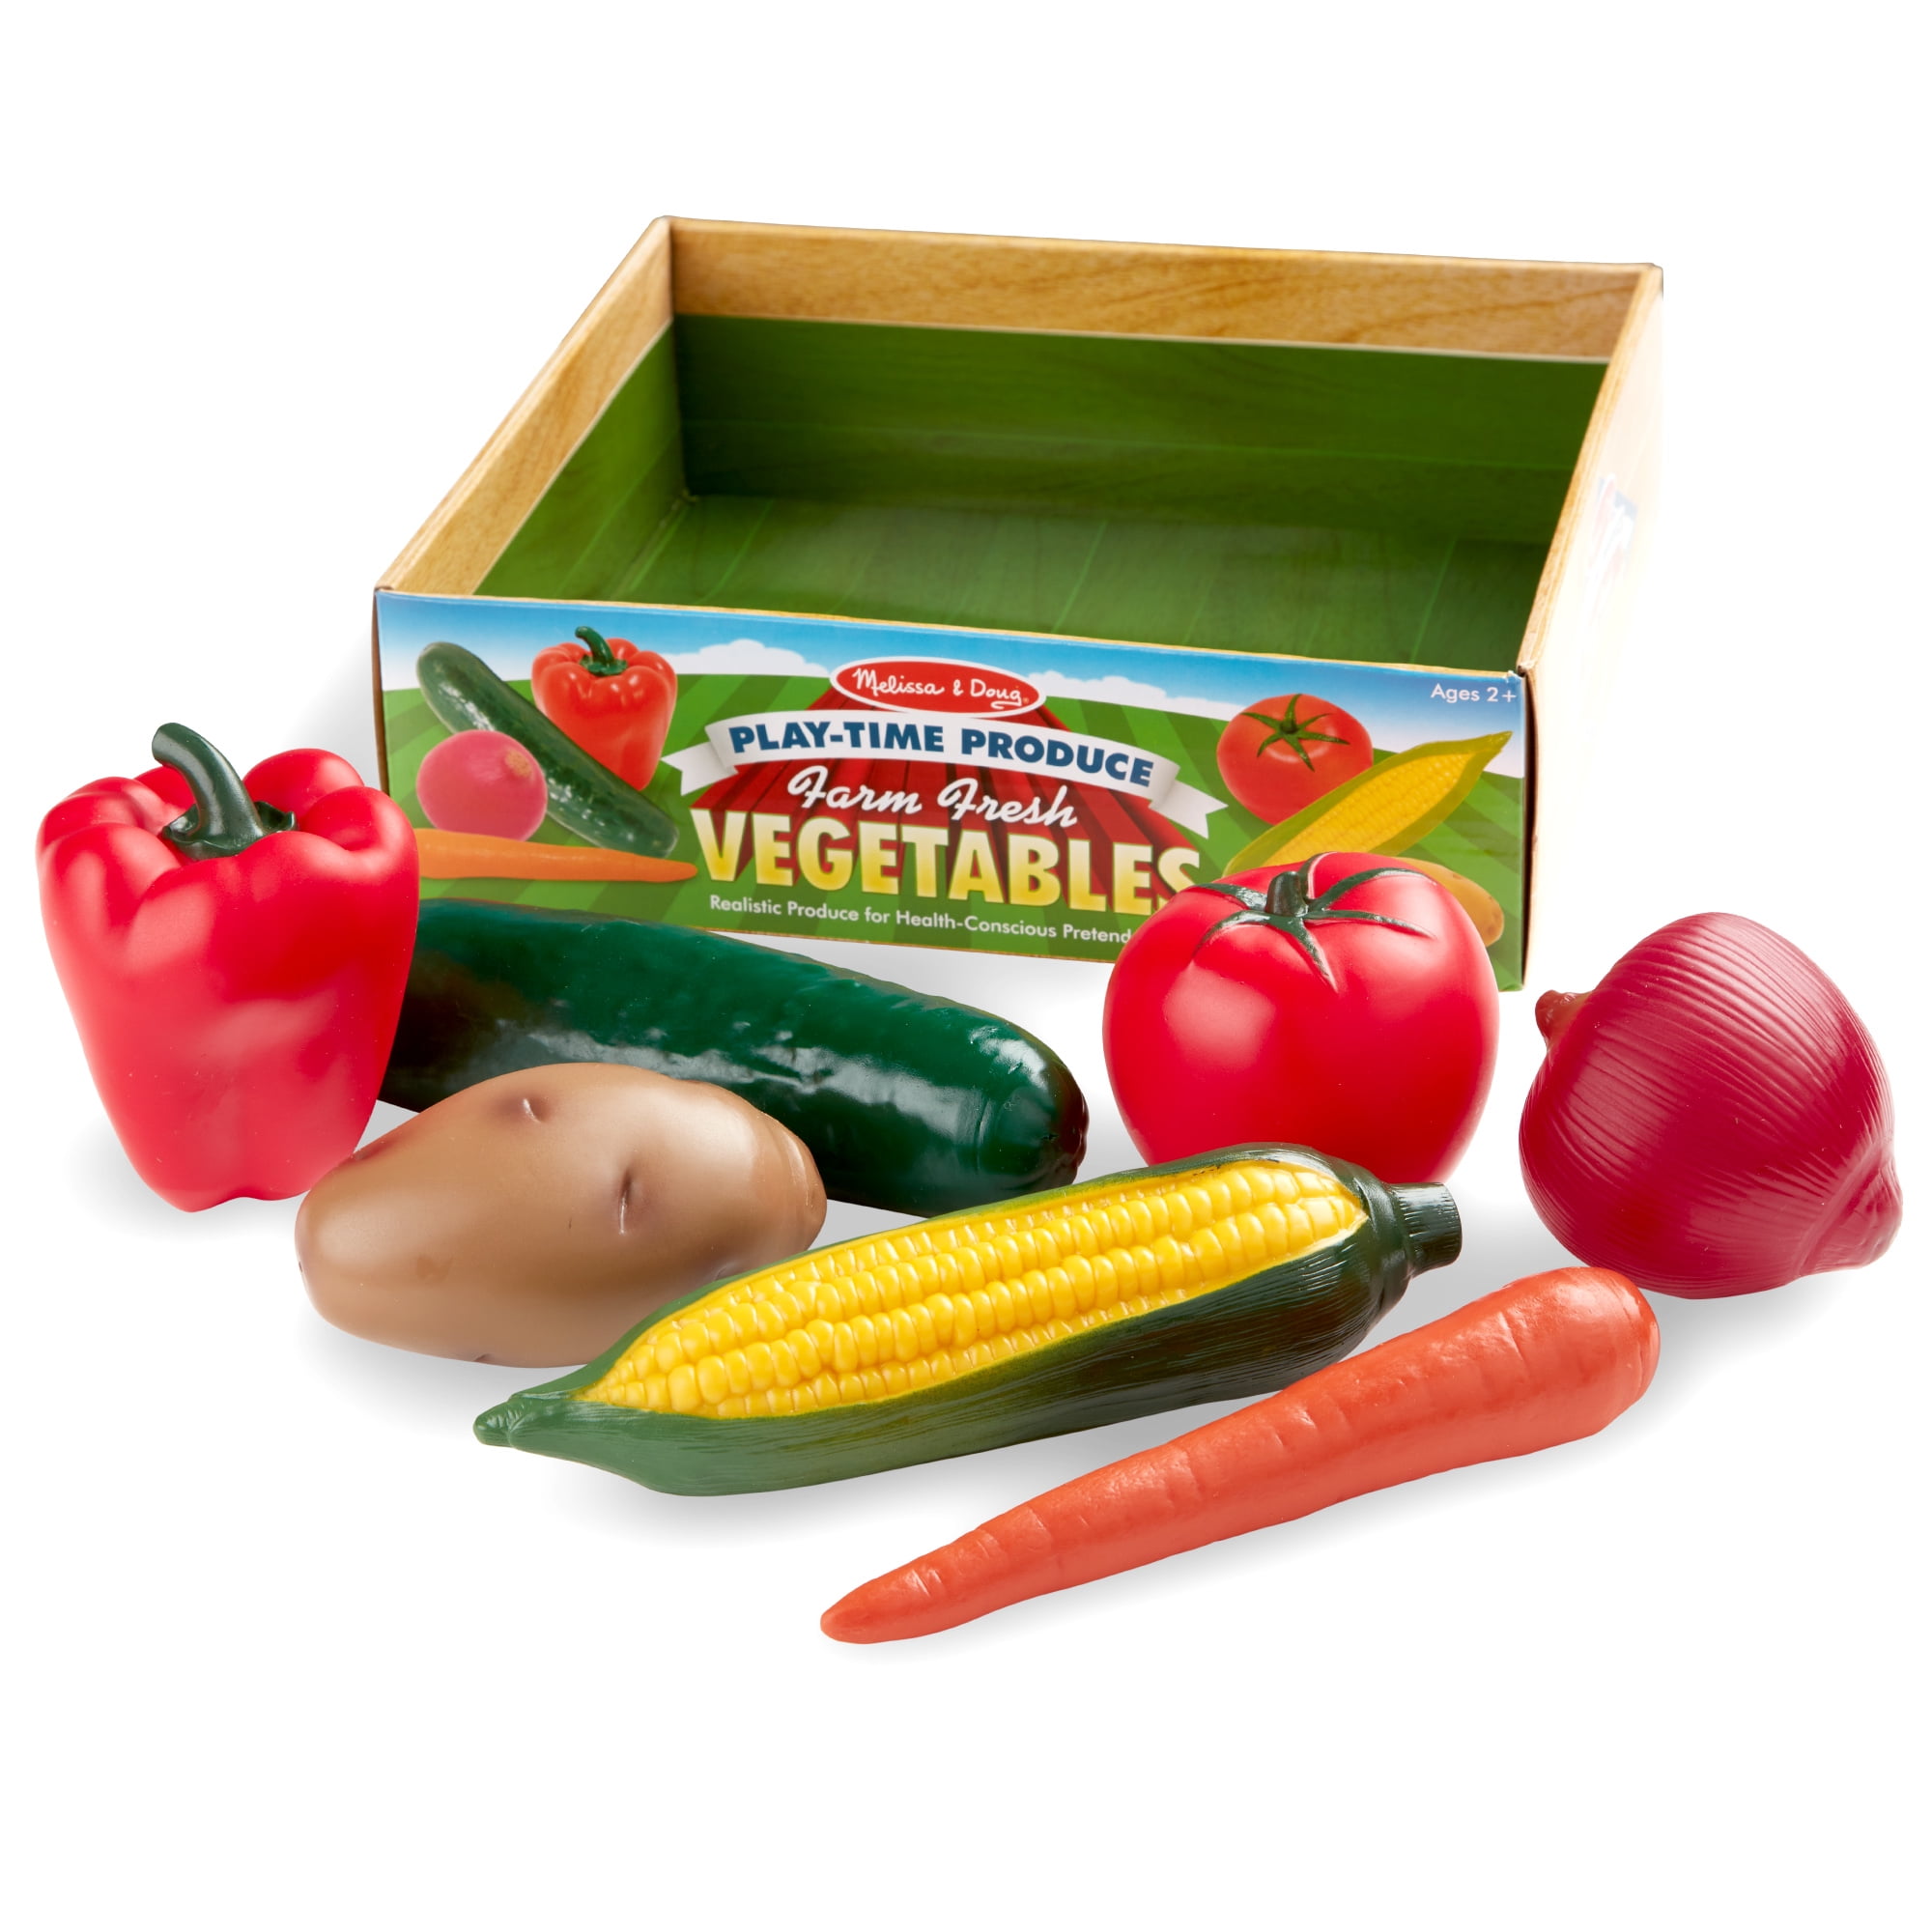 Melissa & Doug Play-time Produce Vegetables 4083 Play Food for sale online 